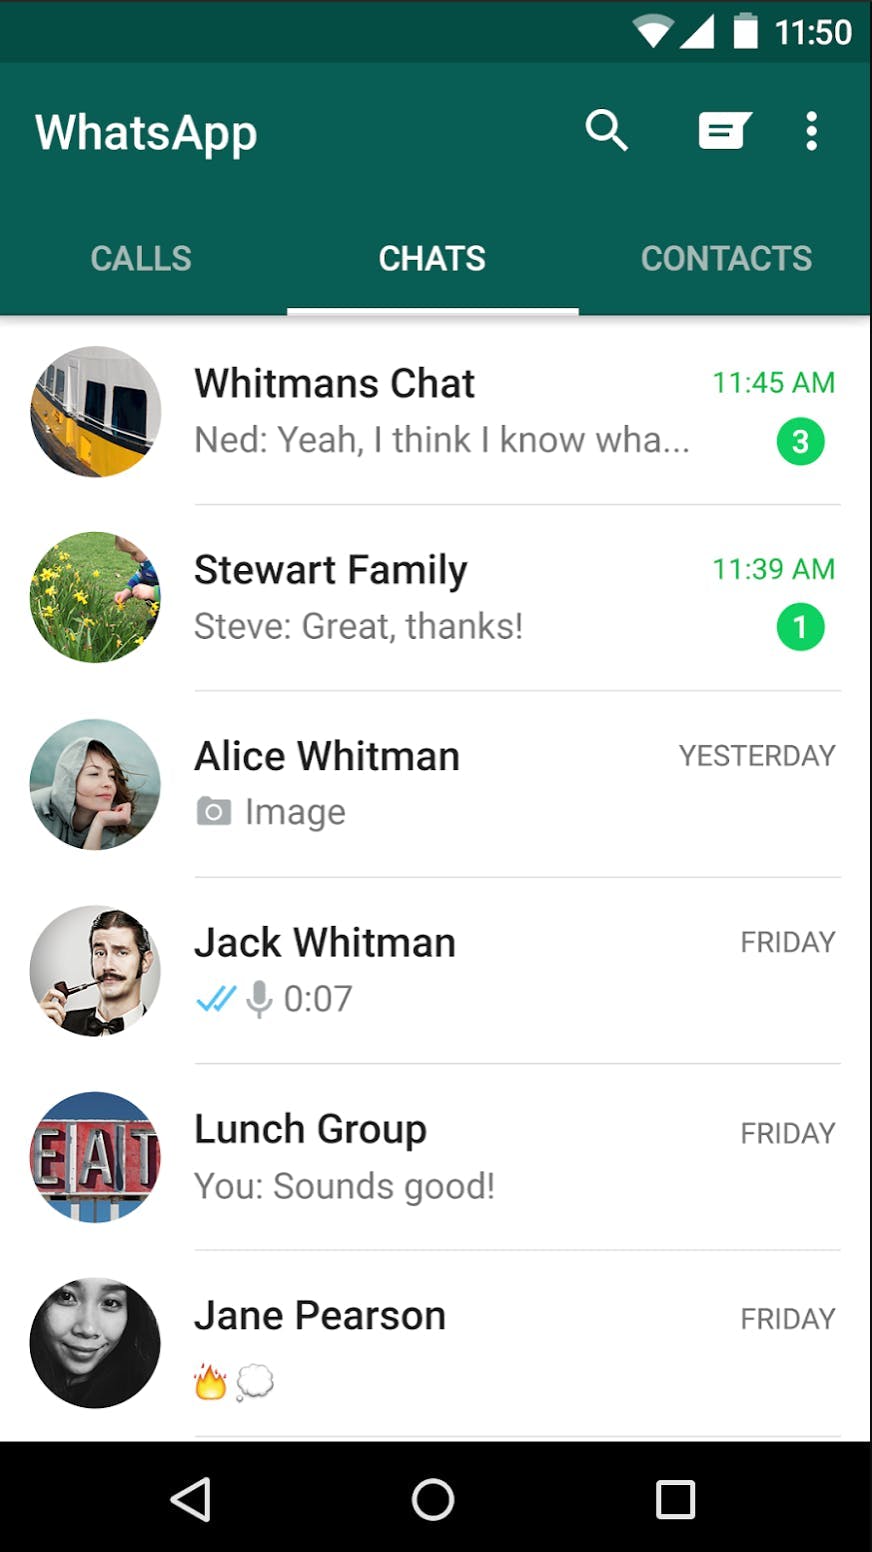 A screenshot of the home screen within WhatsApp that displays all of your active conversations.